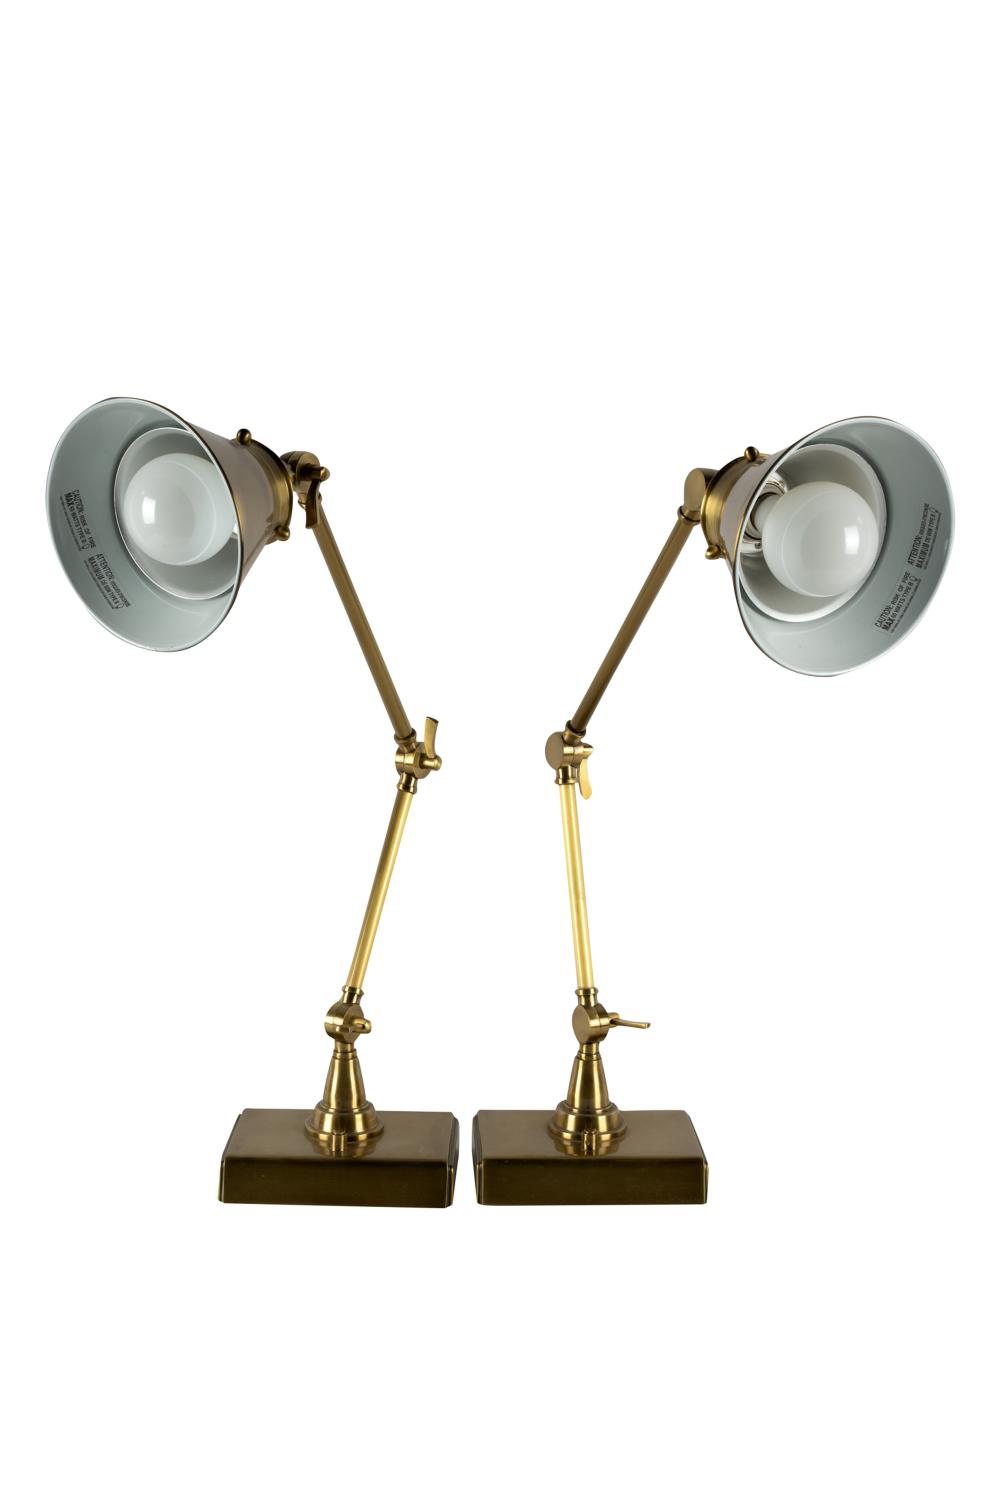 PAIR OF BRASS ADJUSTABLE TABLE 3332ee